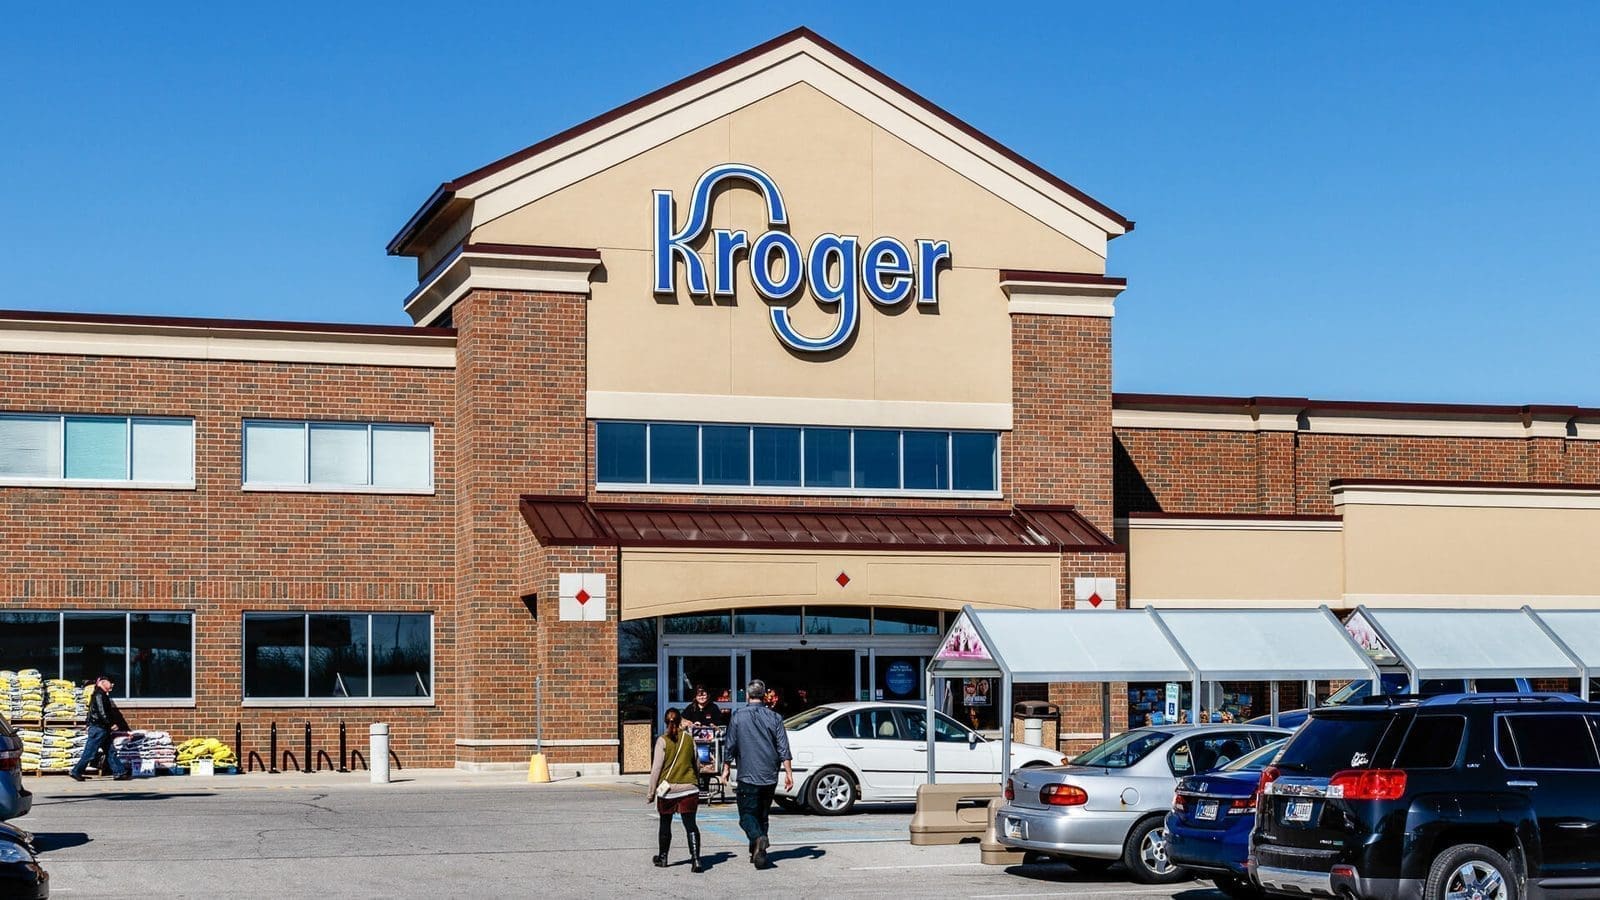 Retail giant Kroger introduces low-cost food brand as a part of revised store brand strategy